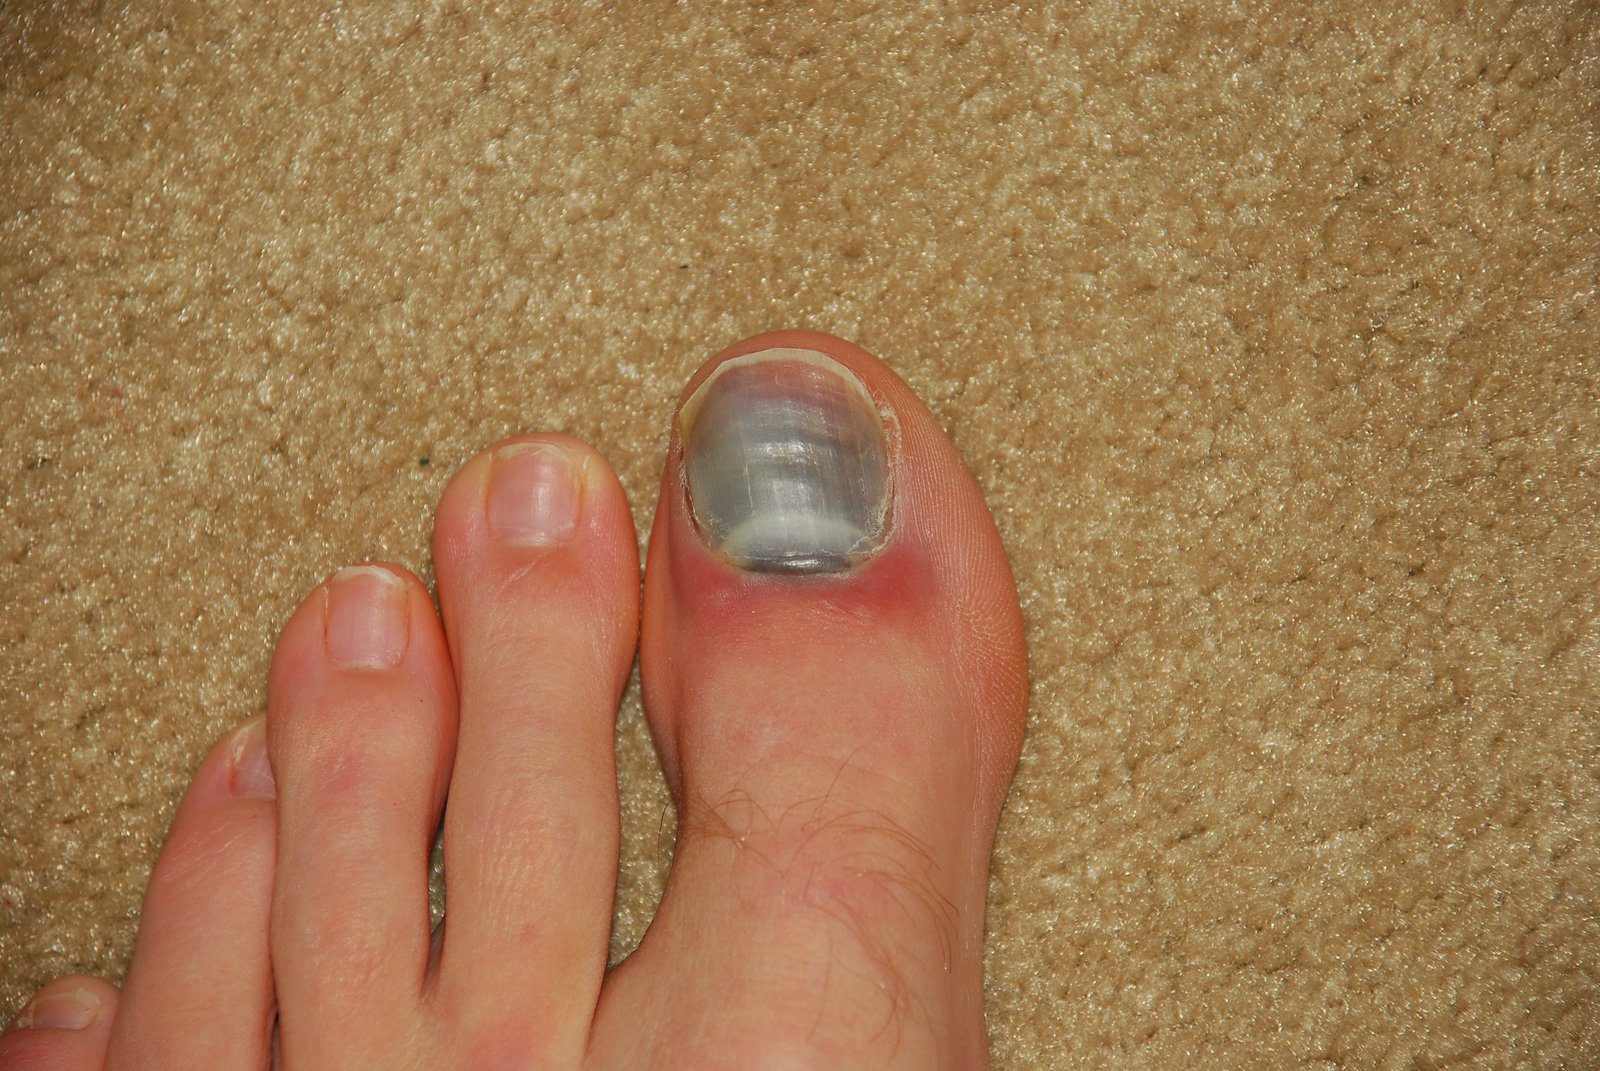 Toe about a week after it happened